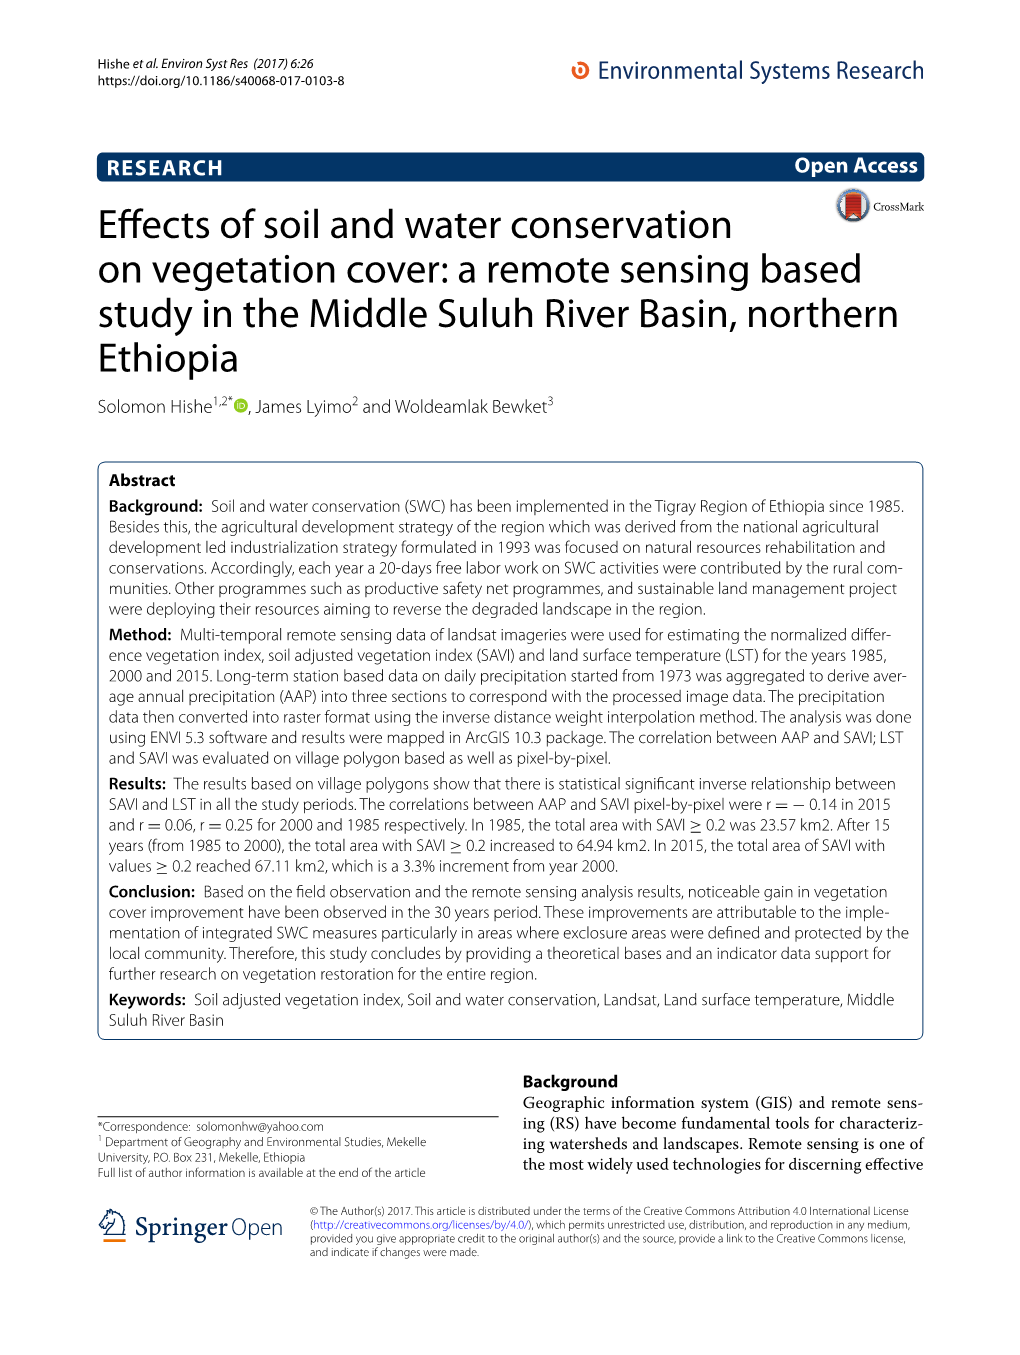 A Remote Sensing Based Study in the Middle Suluh River Basin, Northern Ethiopia Solomon Hishe1,2* , James Lyimo2 and Woldeamlak Bewket3